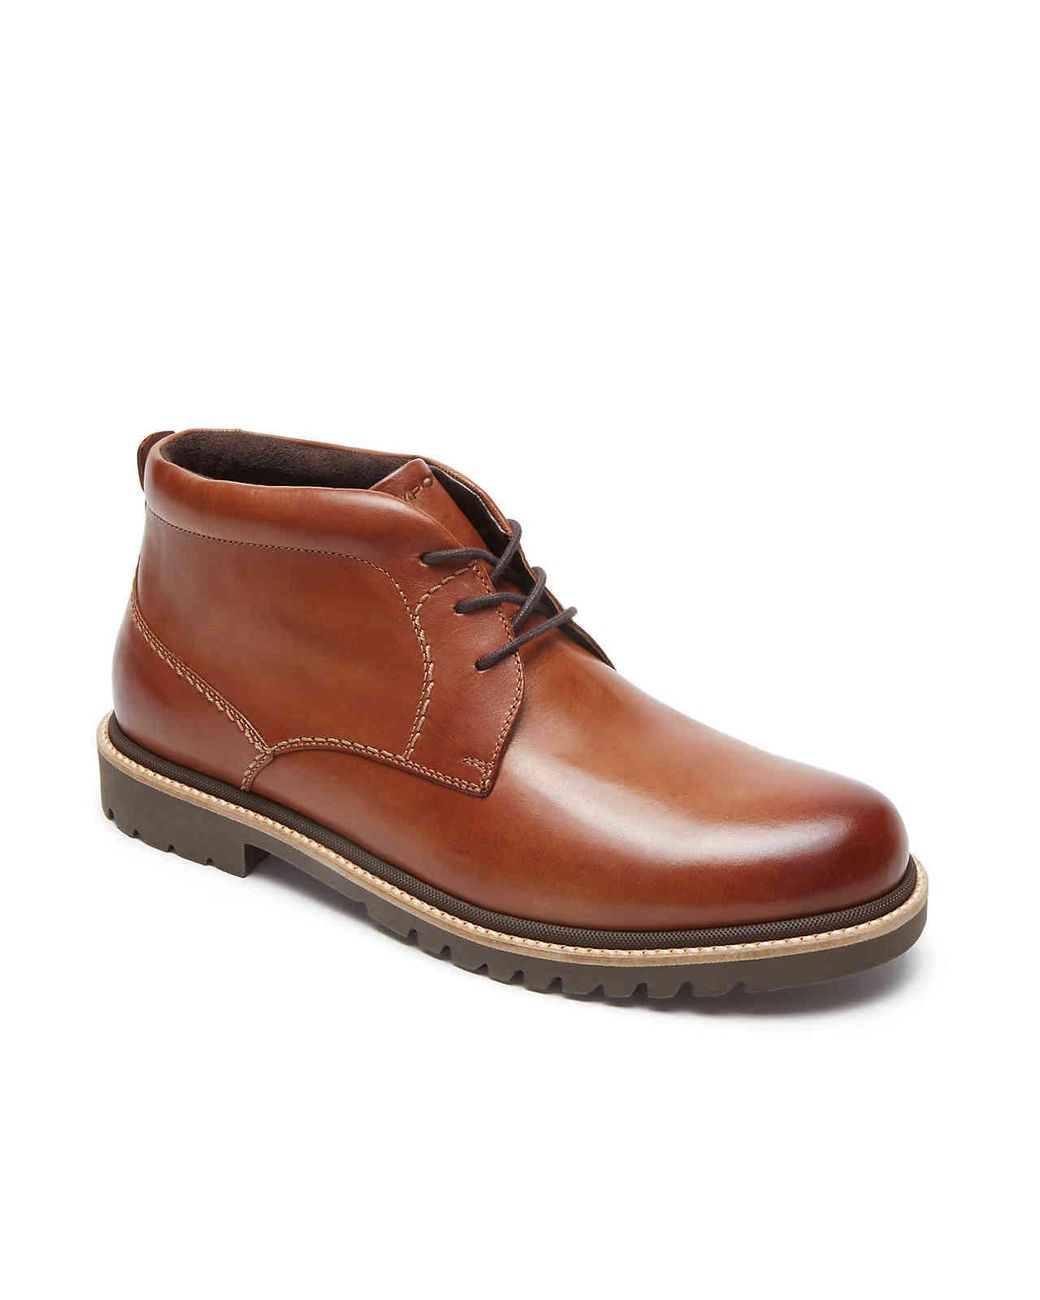 Rockport Marshall Leather Chukka Boots in Cognac (Brown) for Men - Save ...